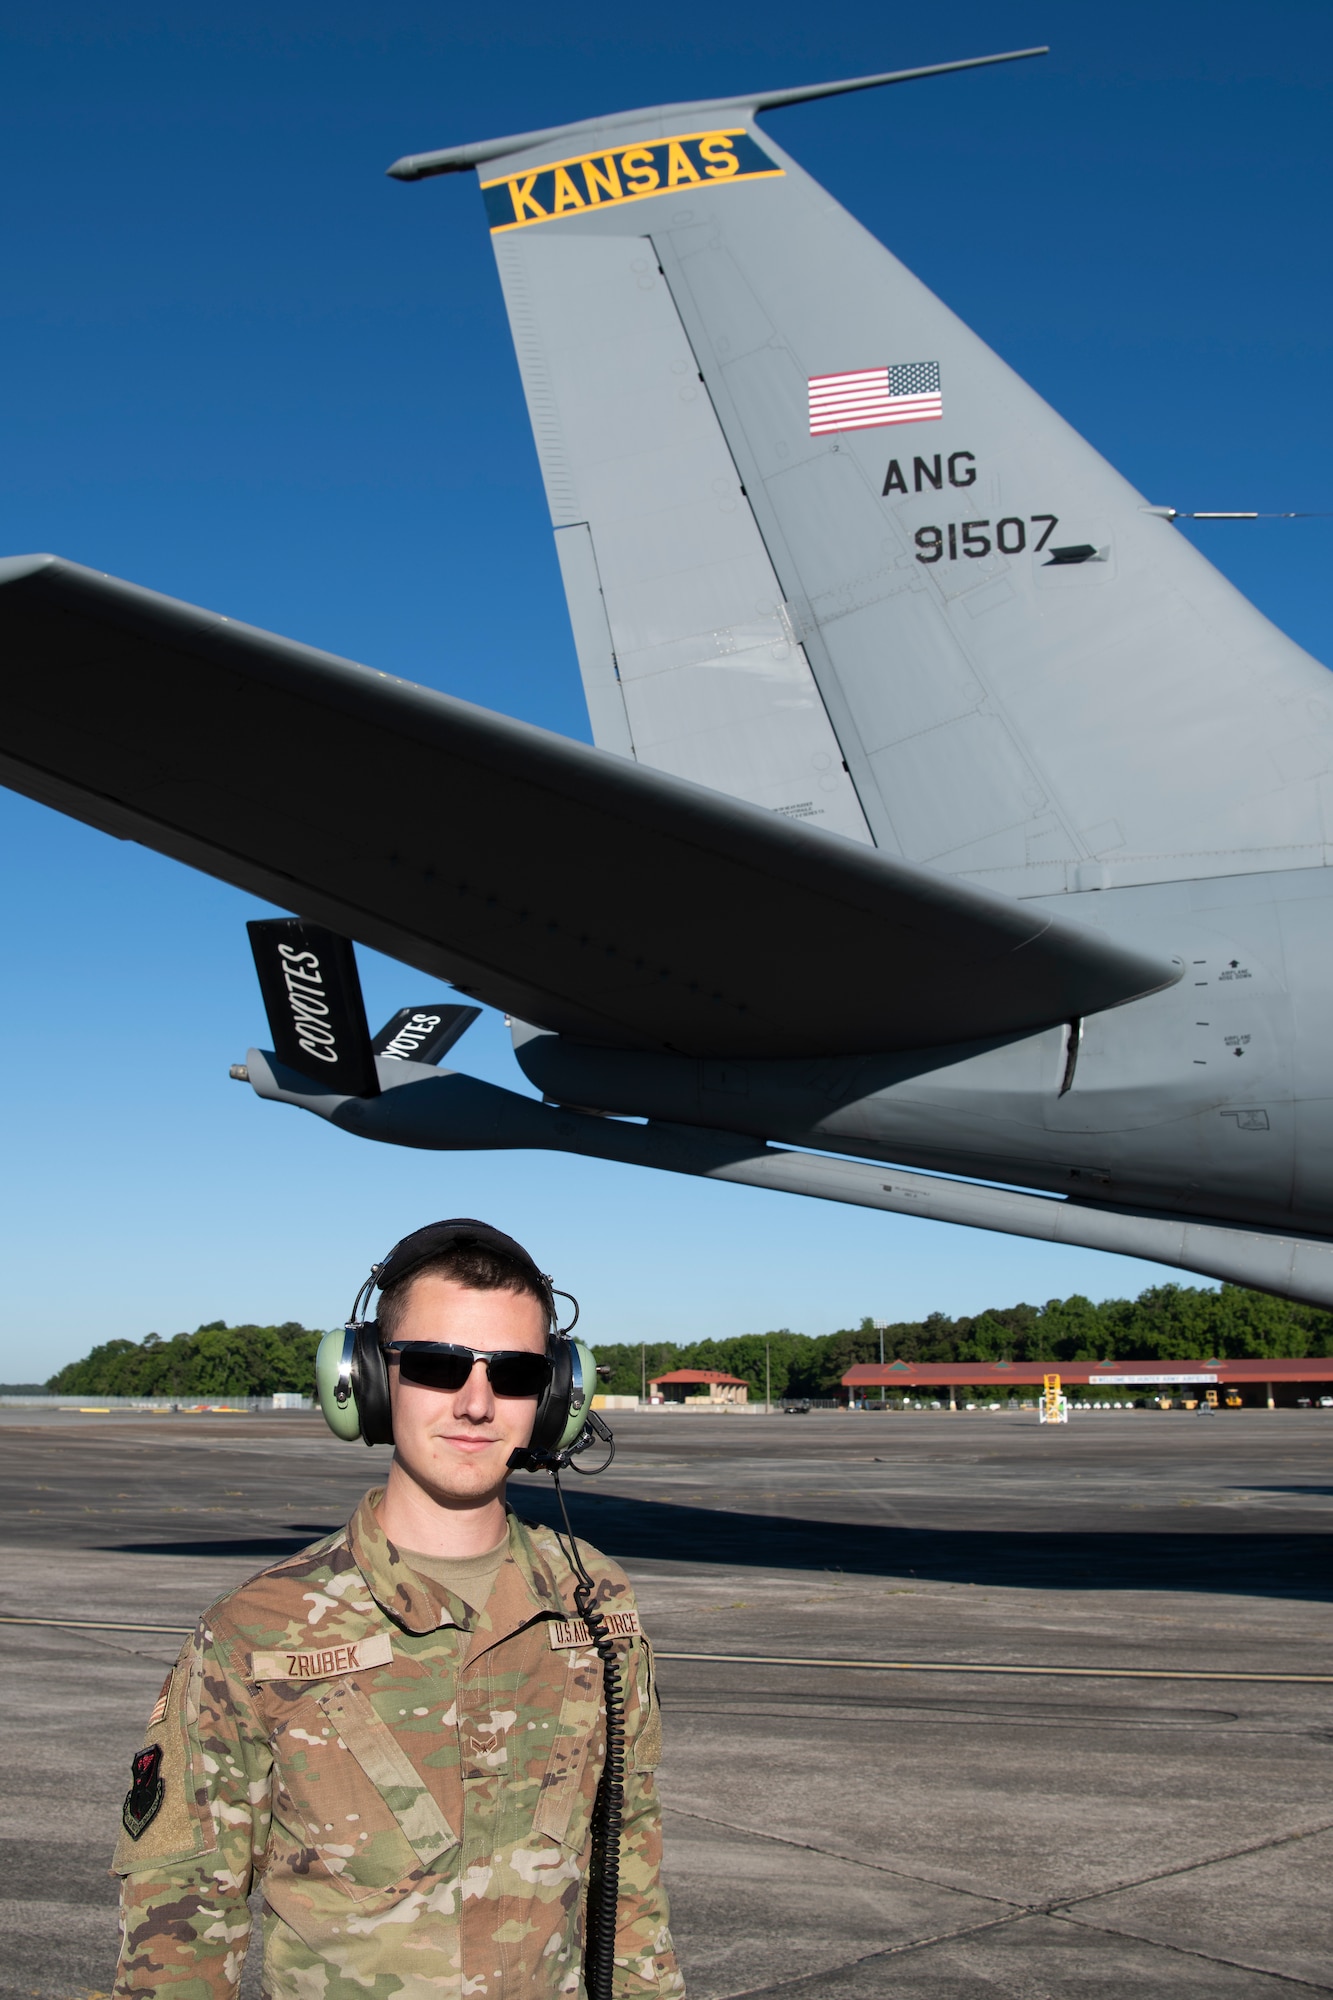 A U.S. Air Force KC-135 Stratotanker crew chief with the 190th Air Refueling Wing, Kansas Air National Guard, poses for a photo on the flightline May 11, 2022, at Hunter Army Airfield, Georgia. Exercises like Sentry Savannah held at the Air Dominance Center not only train and test the counter air capabilities of the next generation of fighter pilots, but they also provide critical experience and training to 10 different units of maintenance Airmen in the rapid employment and recovery of aircraft. (U.S. Air National Guard photo by Staff Sgt. Hanna Smith)